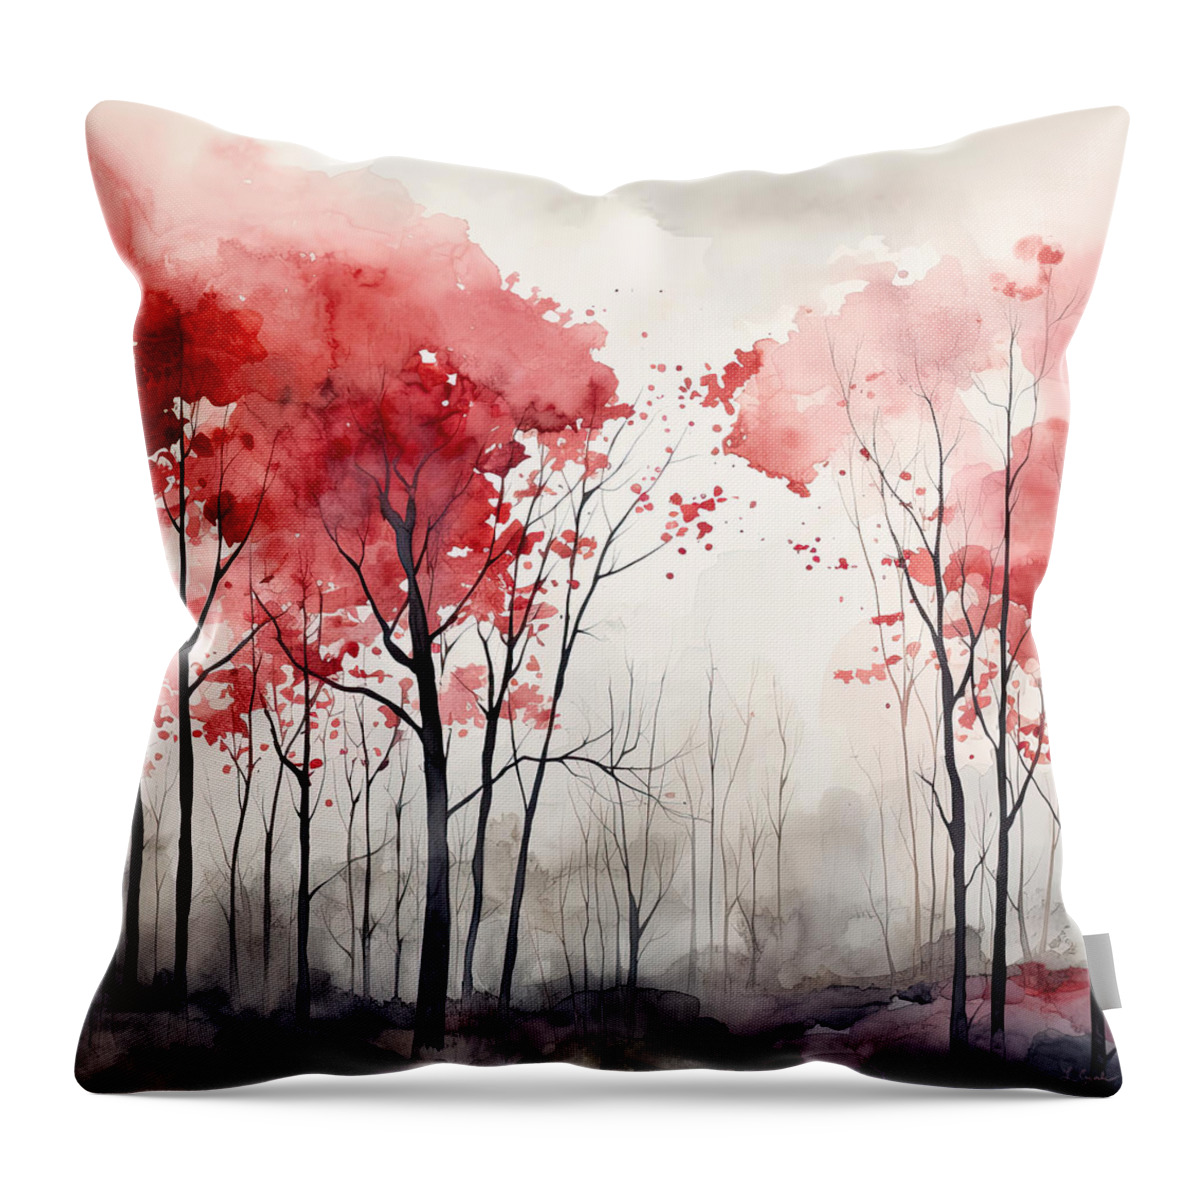 Red And Gray Throw Pillow featuring the photograph Autumn Paradise - Autumn Minimalist Art by Lourry Legarde